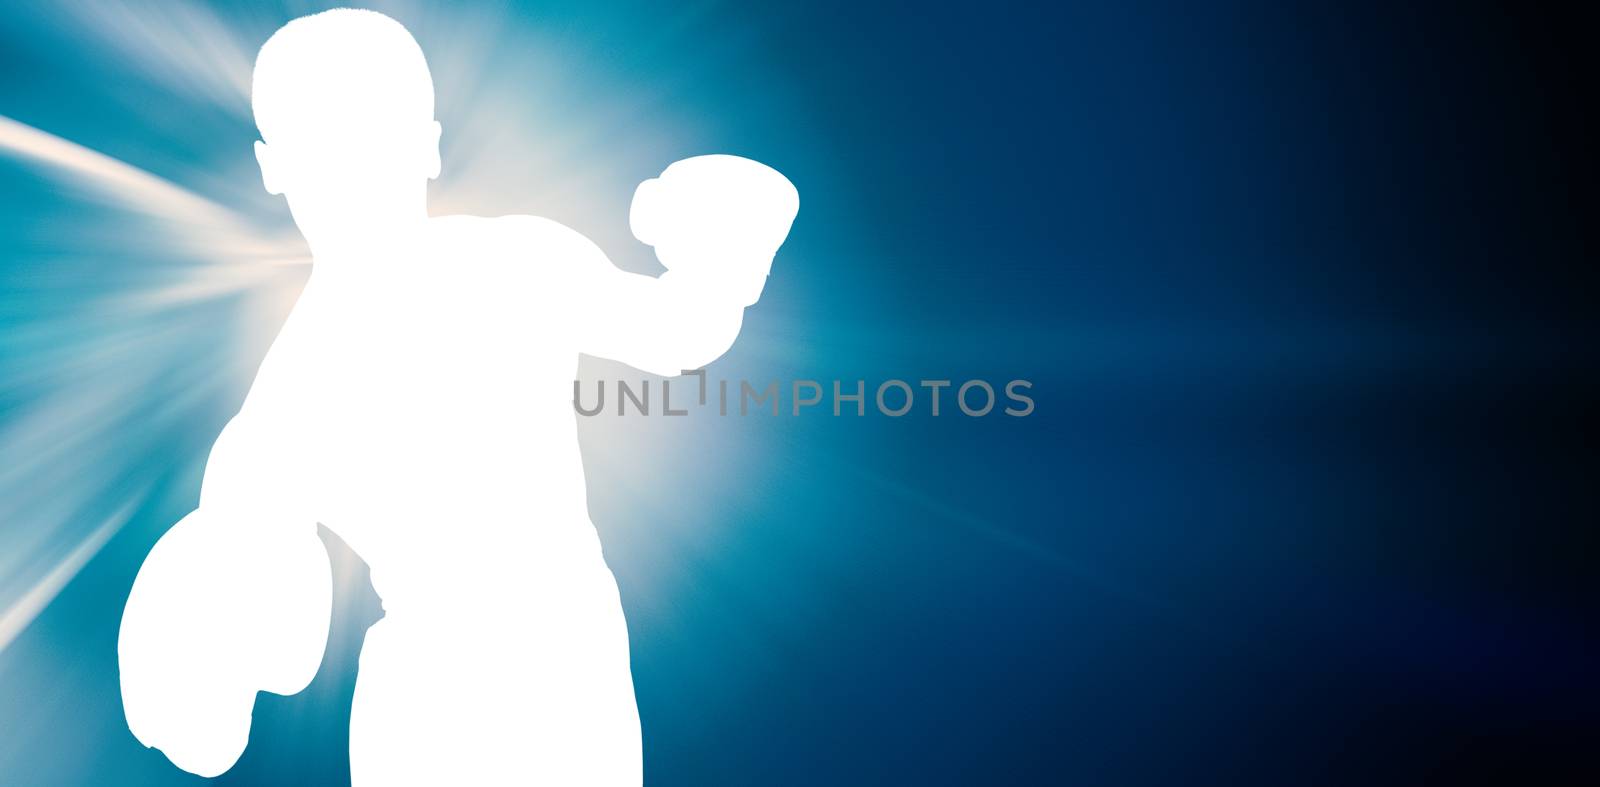 Portrait of boxer performing boxing stance against abstract background